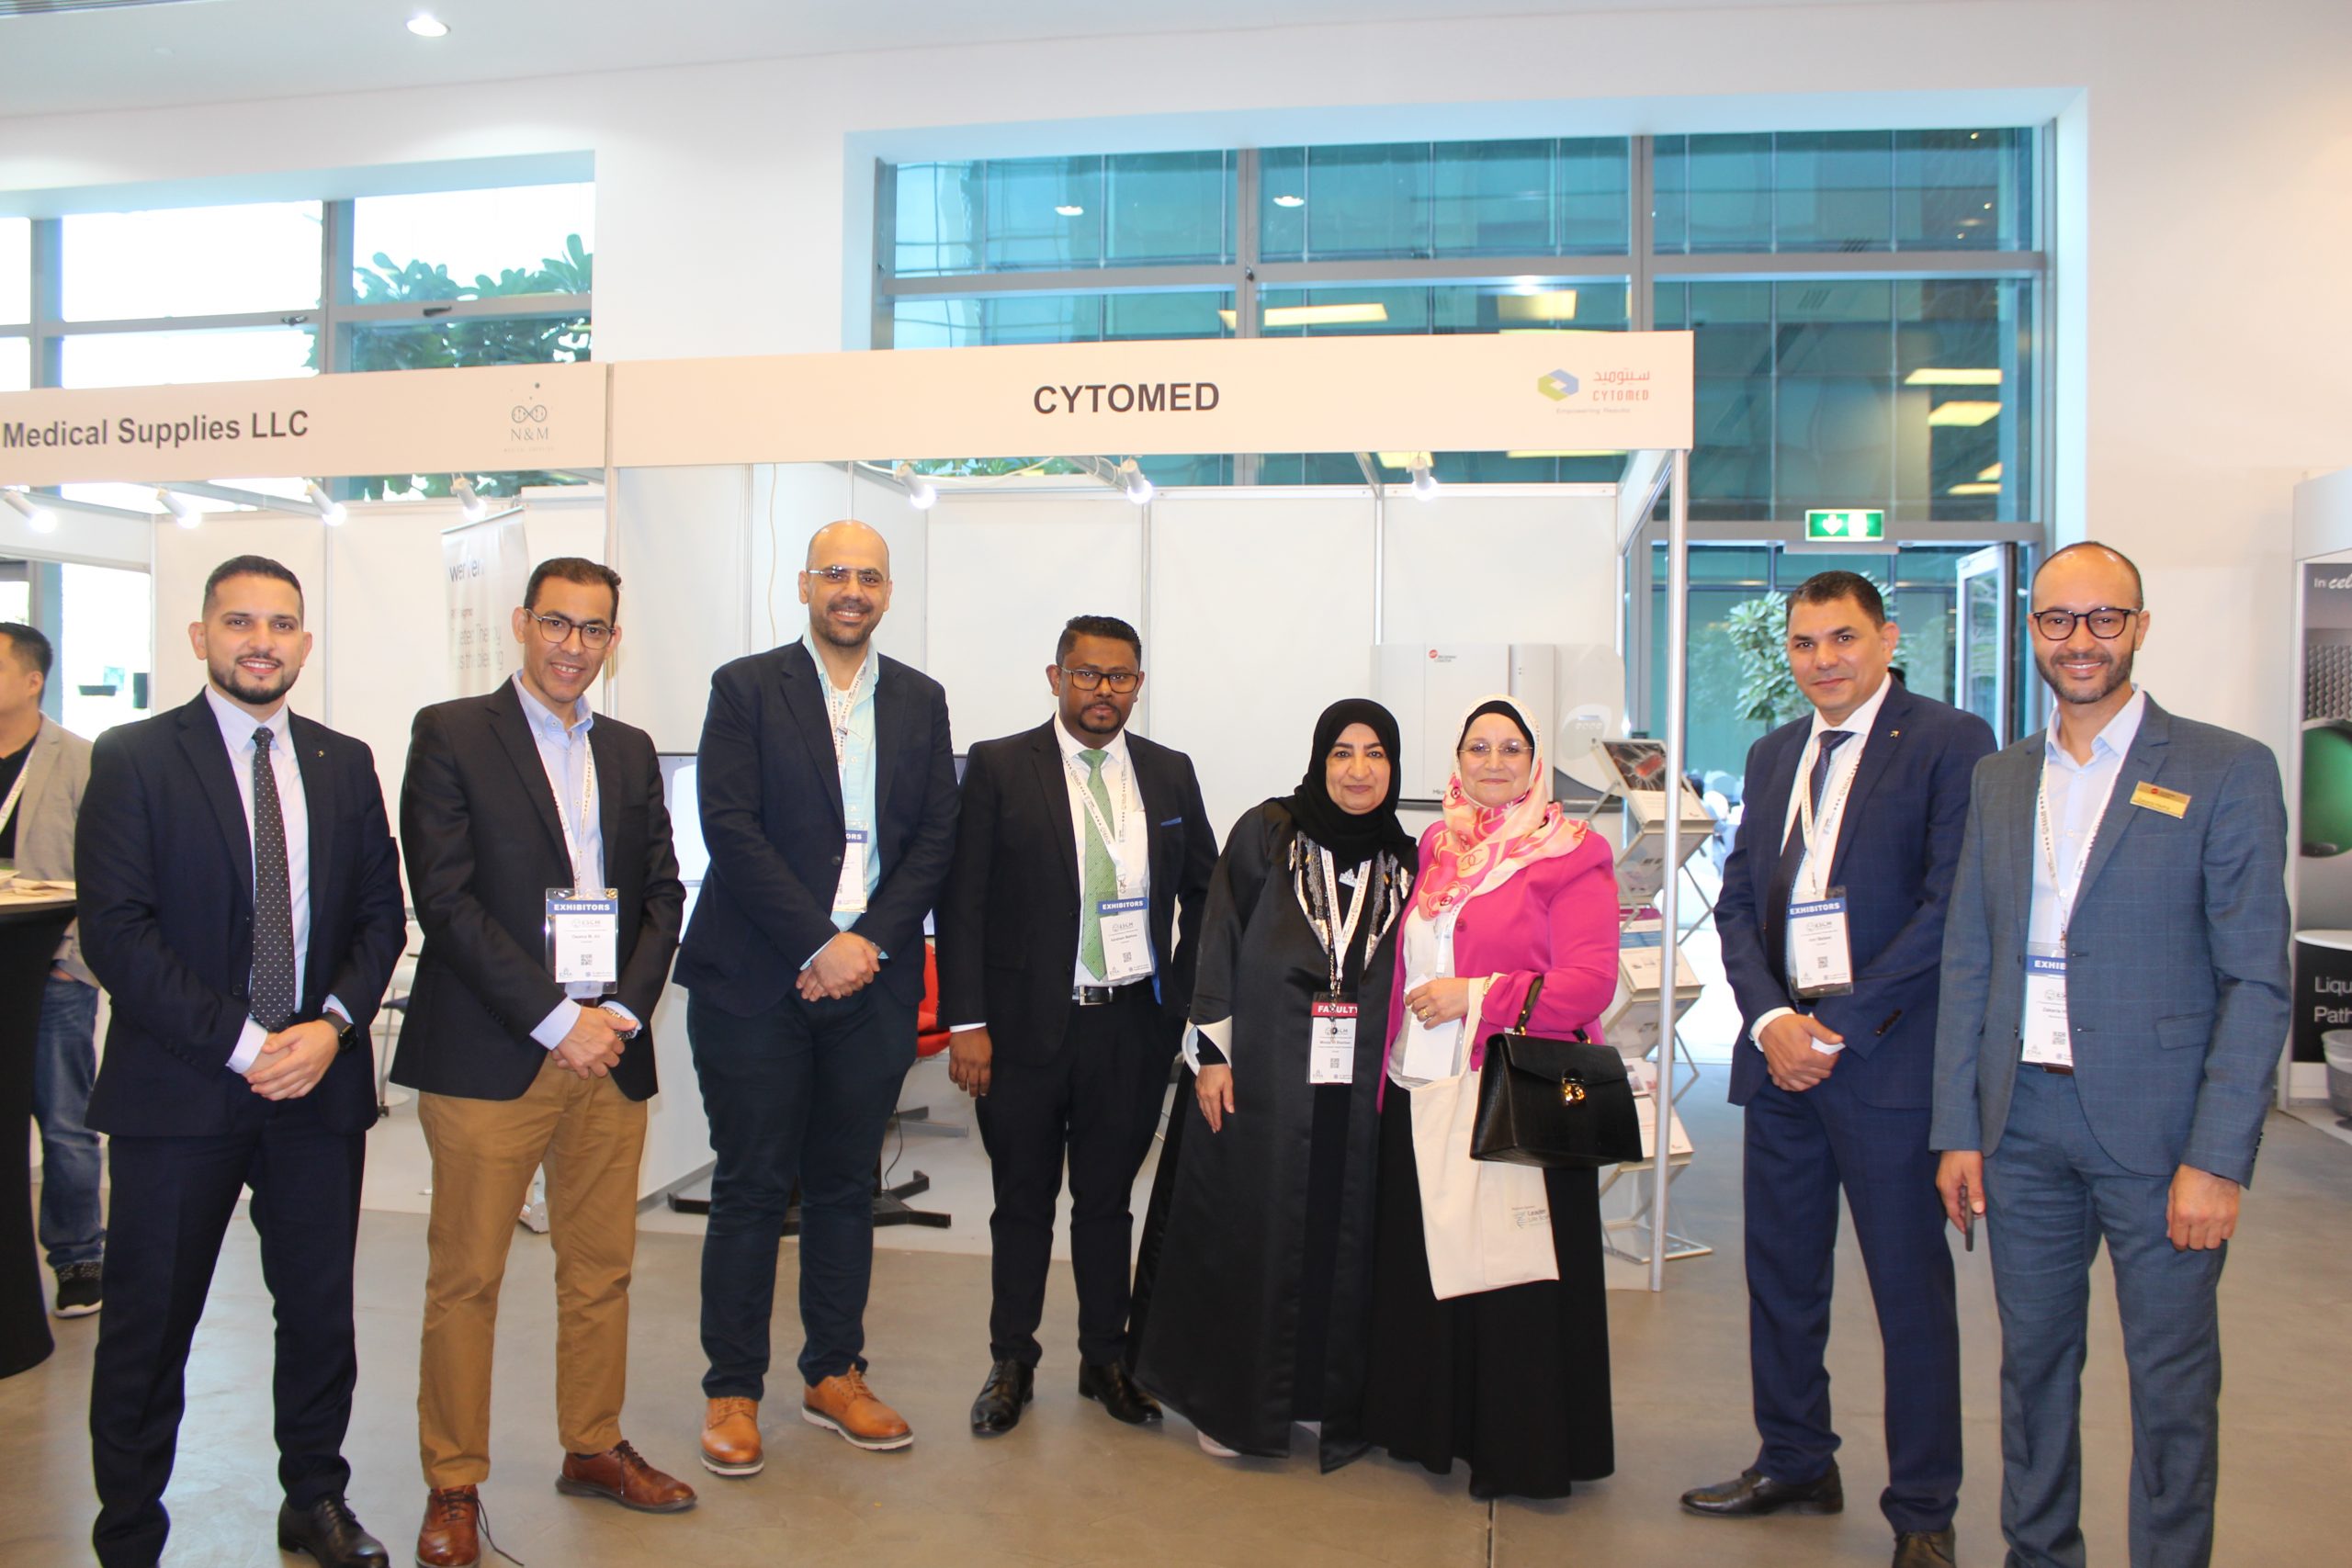 2nd Annual Conference of the Emirates Society of Clinical Microbiology 2022